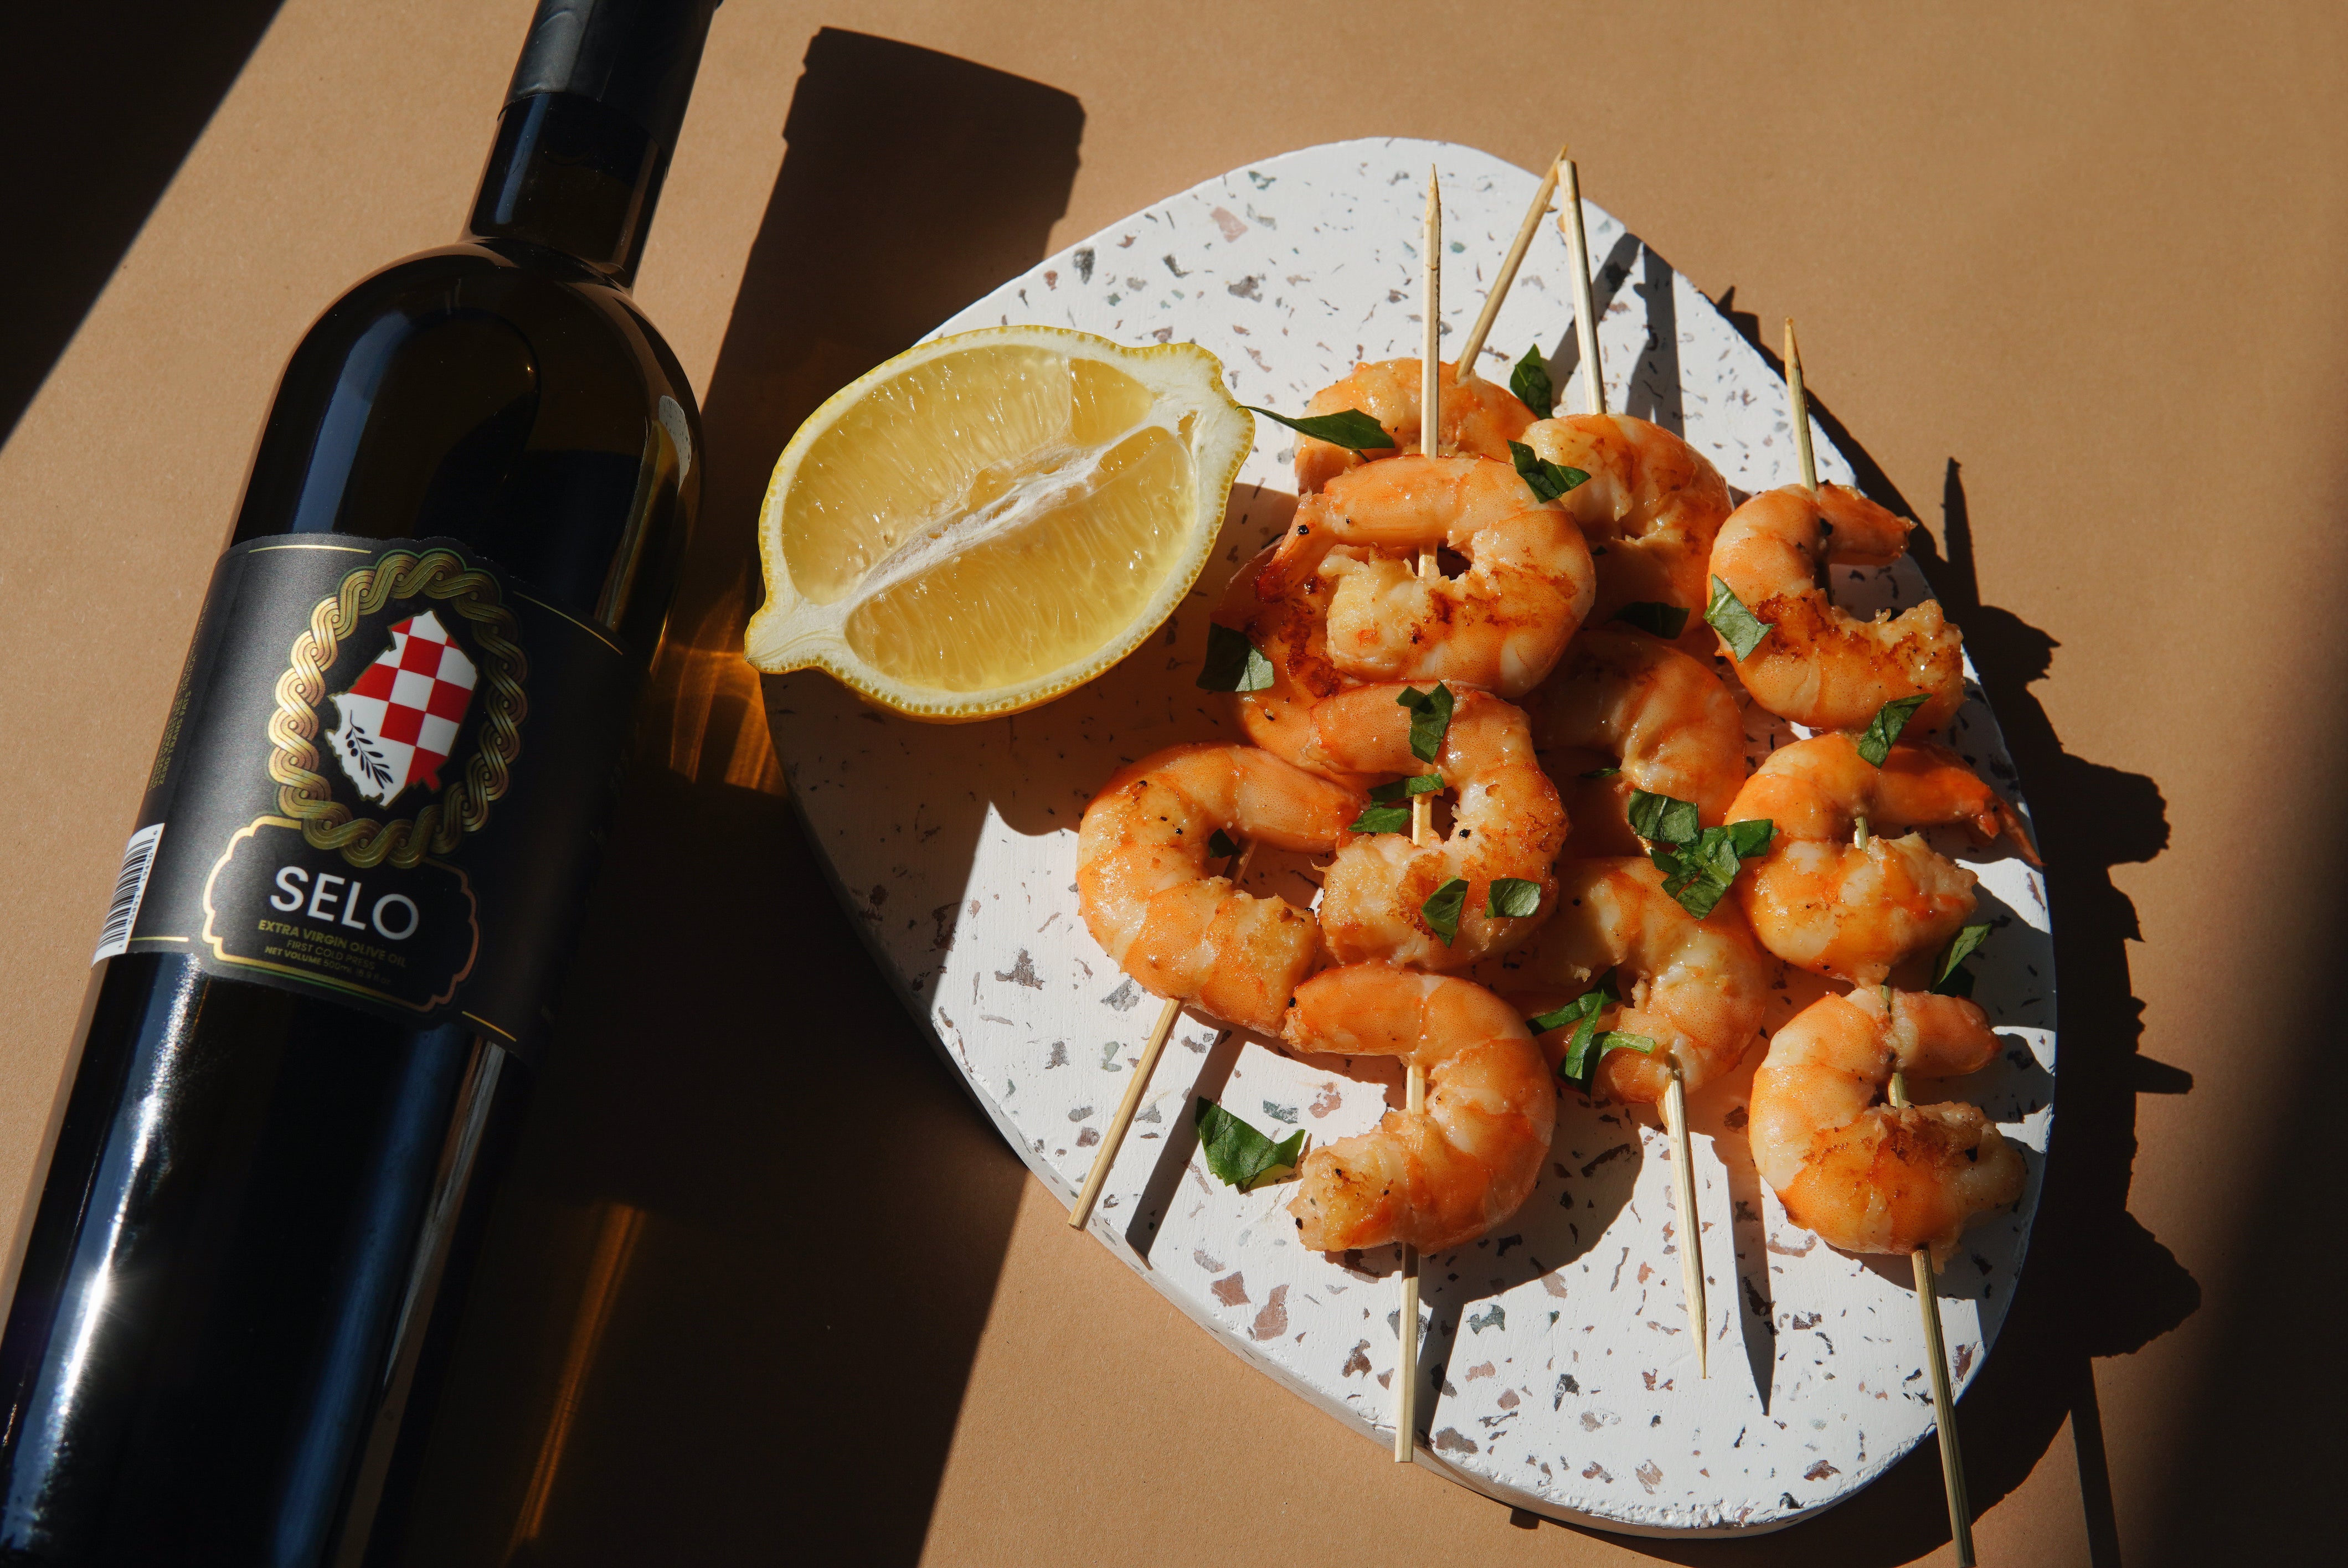 Skewered shrimp glistening with grill marks, infused with a burst of flavors, and accompanied by a vibrant dipping sauce, all made using Selo Croatian extra virgin olive oil and expertly grilled to perfection.